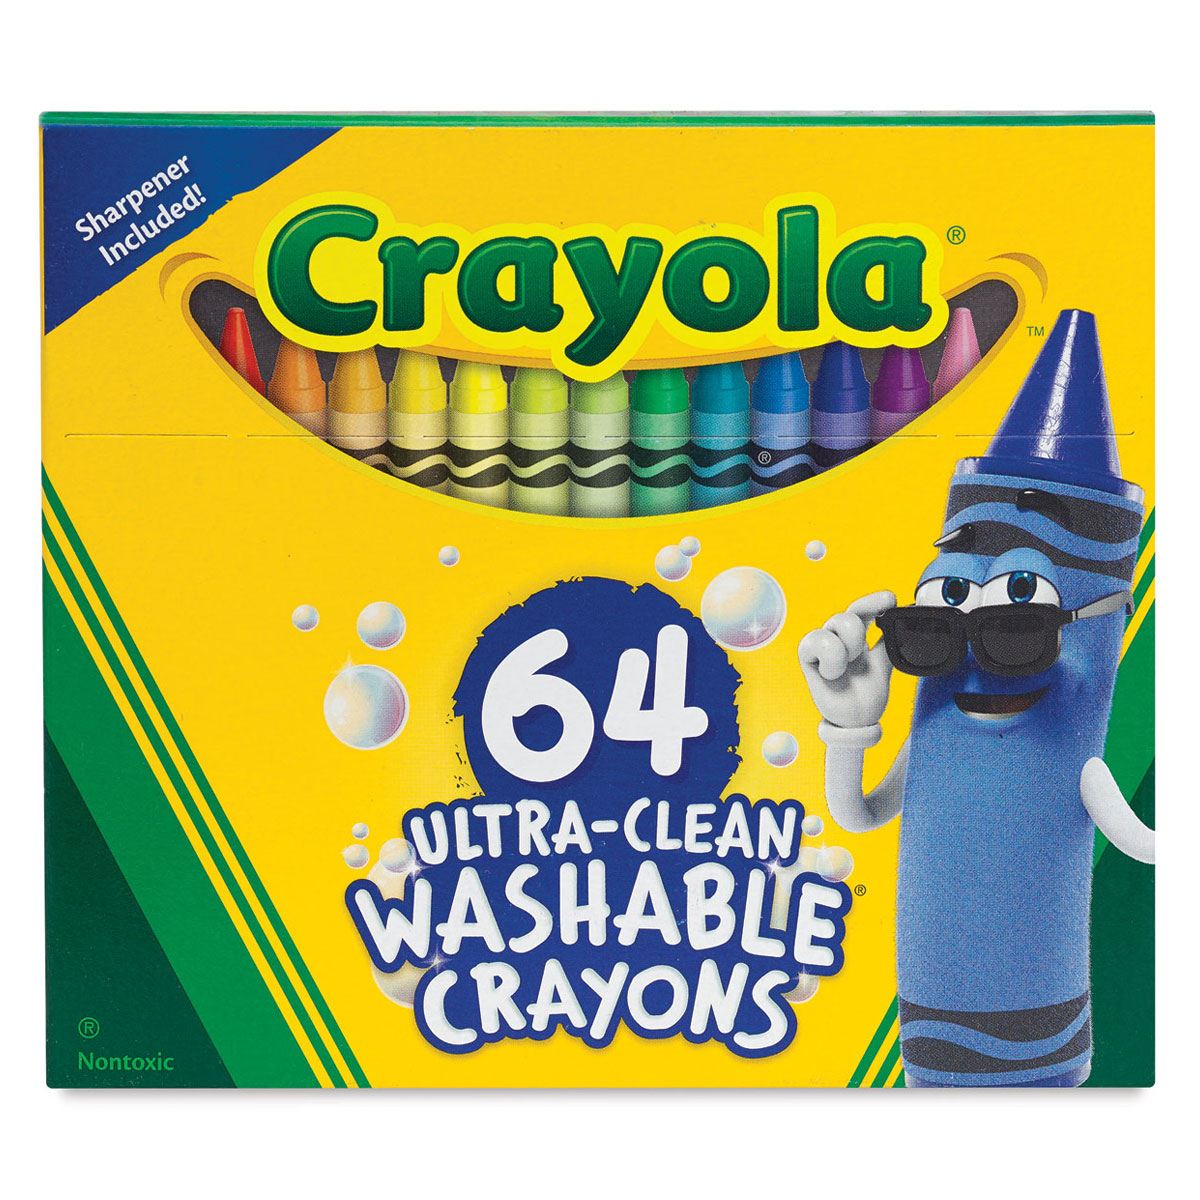 Crayola Ultra-Clean Washable Crayons with Sharpener, 64 Ct, Back to School Supplies, Multi-Color - image 3 of 5